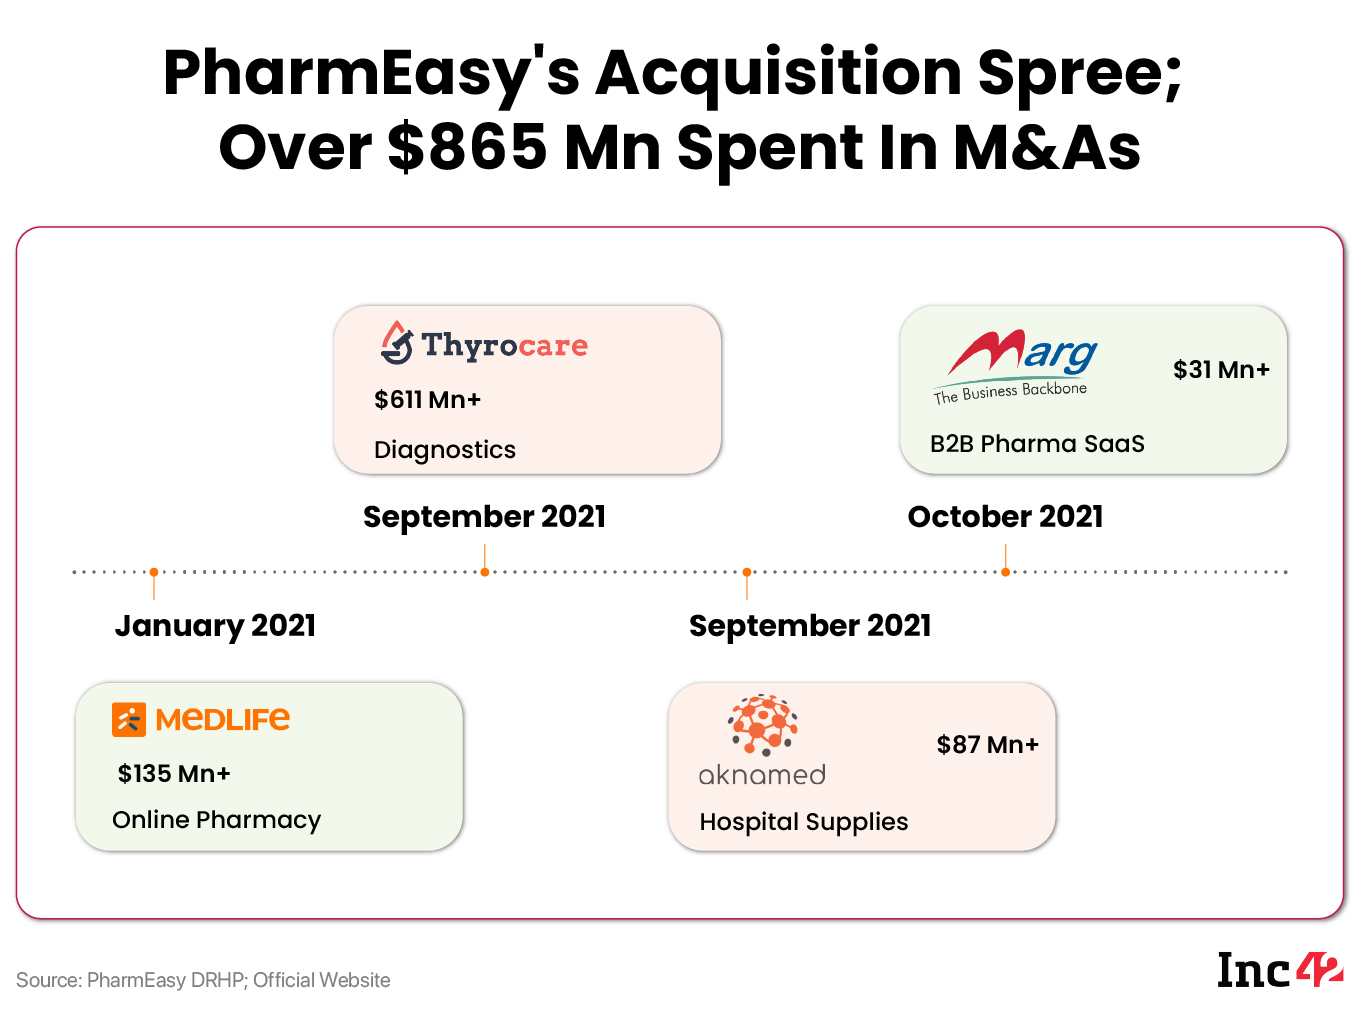 PharmEasy's Expensive Acquisitions